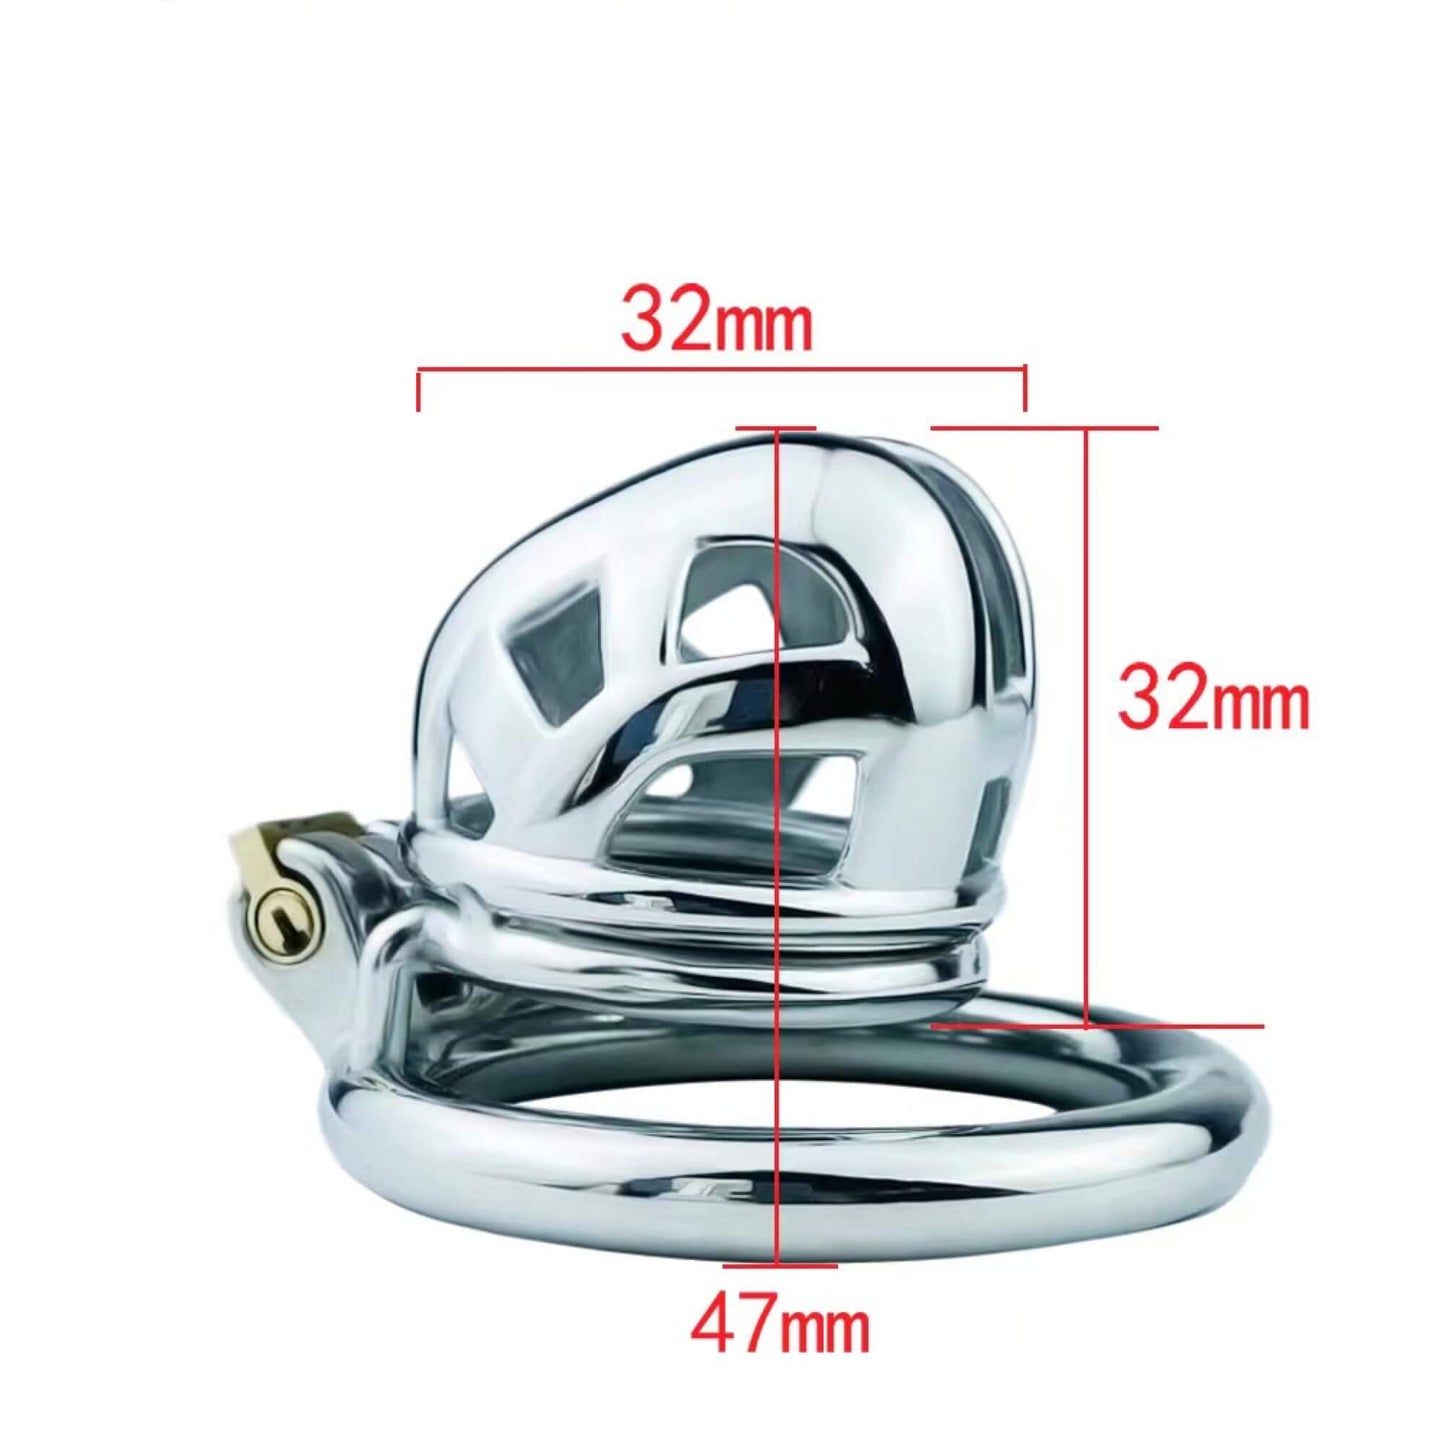 Upgraded Micro Cobra Chastity Cage 1.26 Inches Long